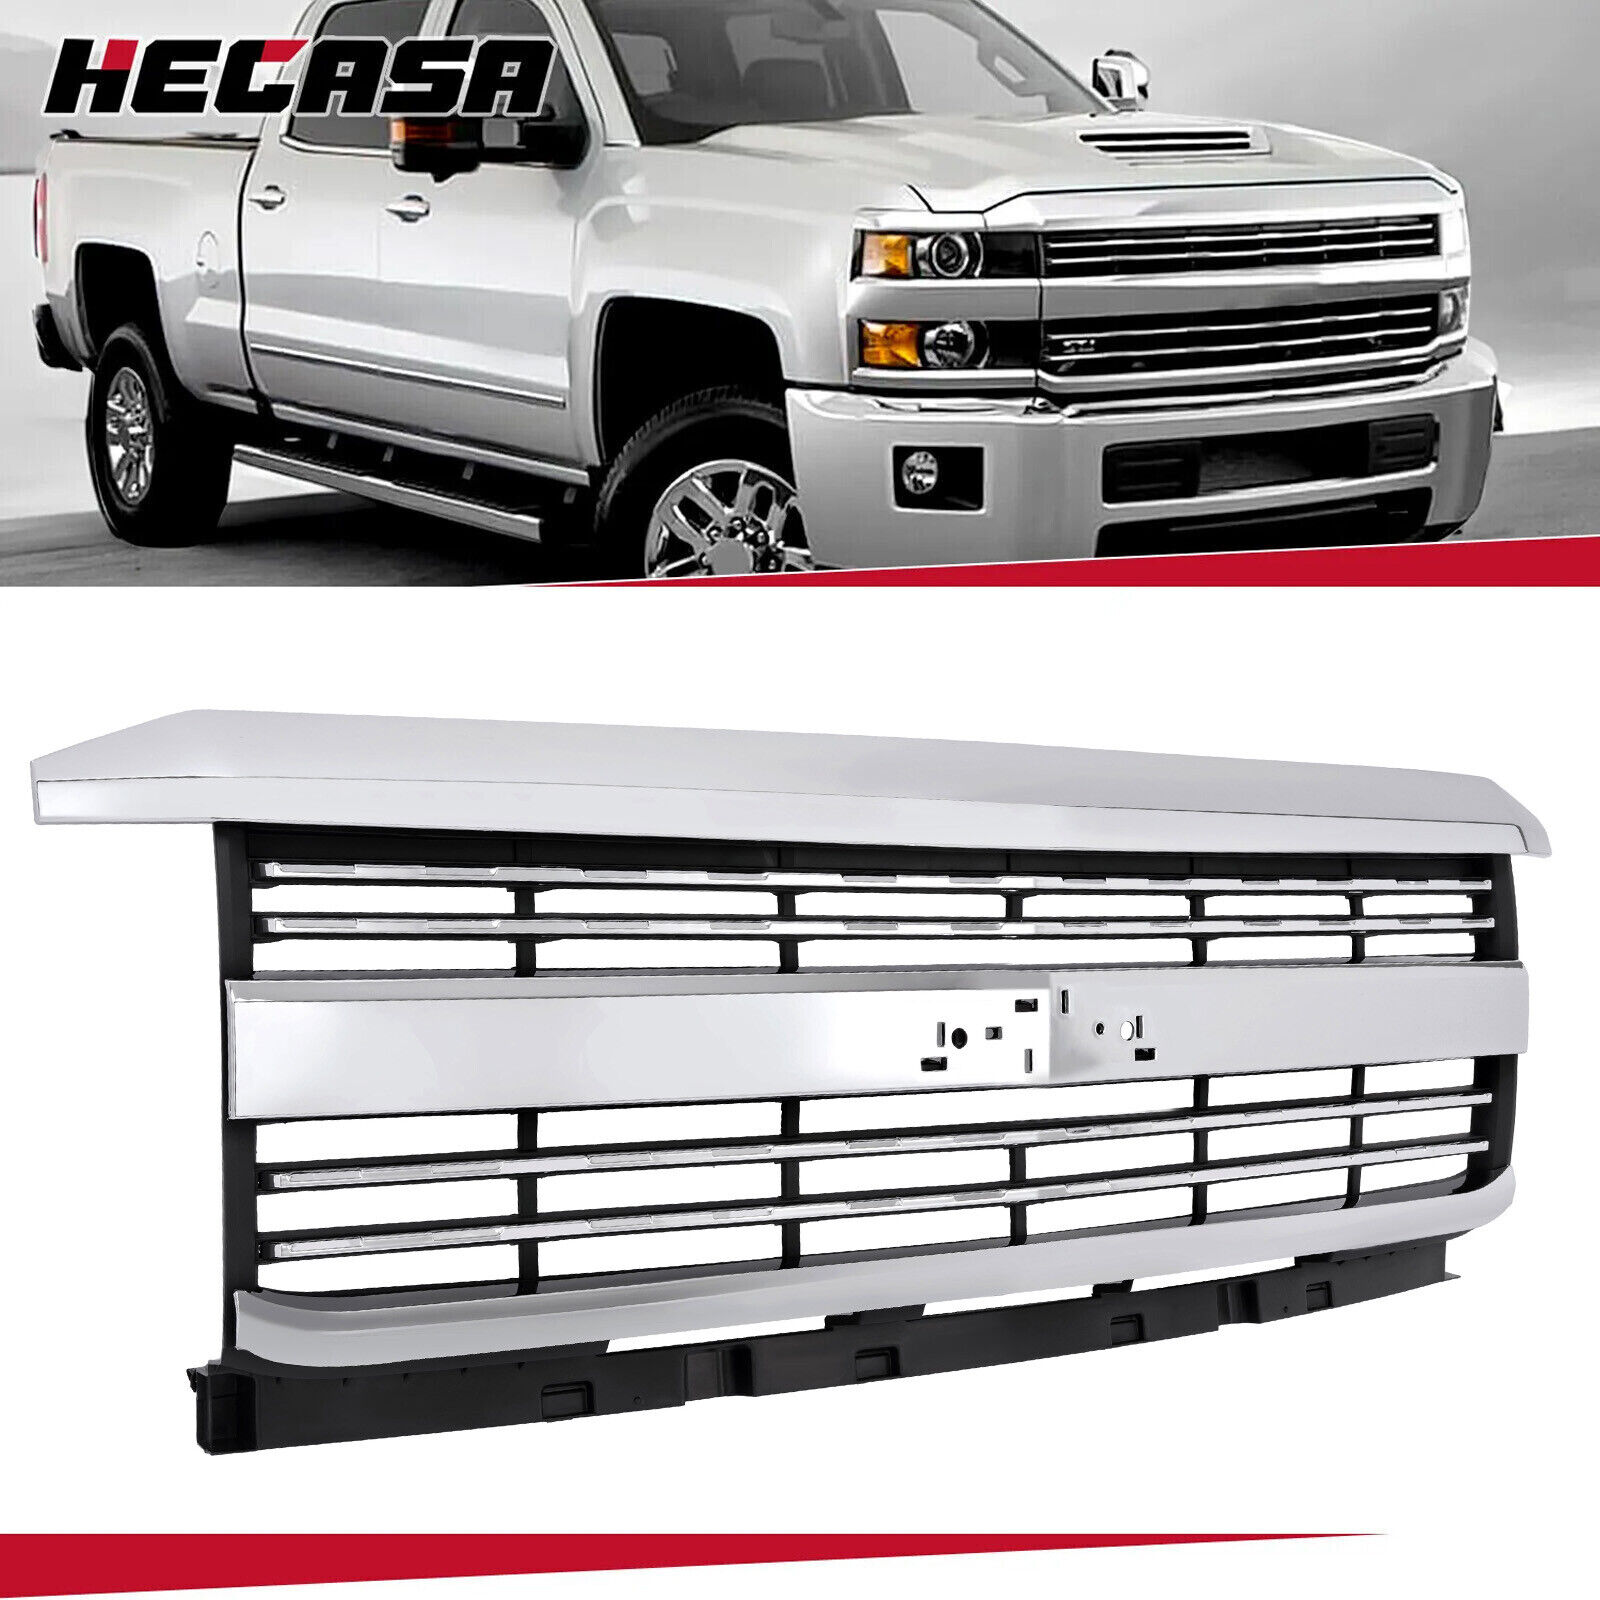 HECASA Chrome Grille Assembly For Chevy Silverado 2500 HD 3500 HD 15-19 23335298